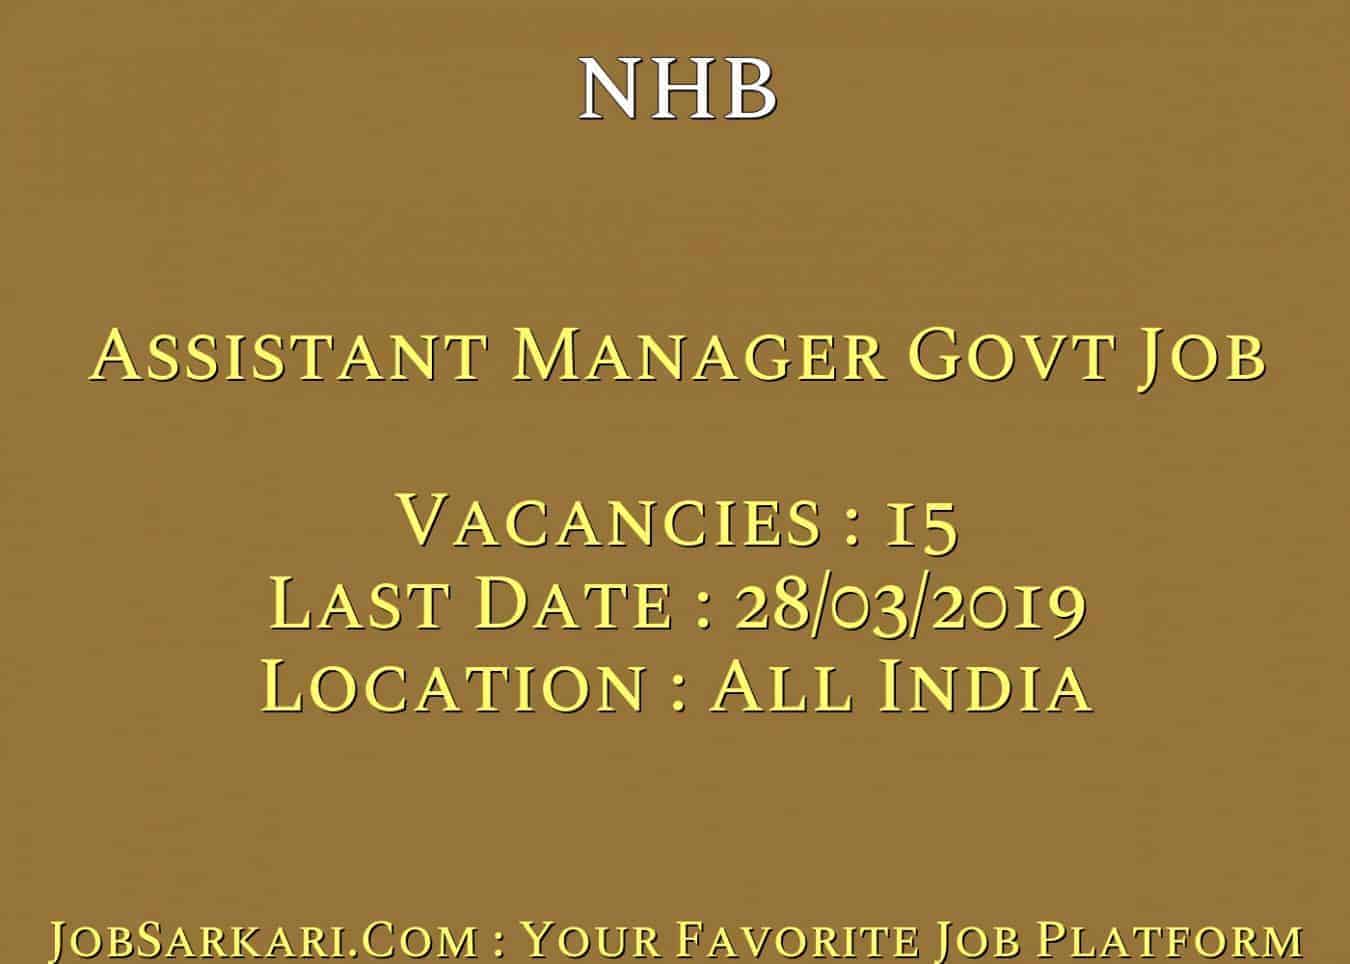 NHB Recruitment 2019 For Assistant Manager Govt Job